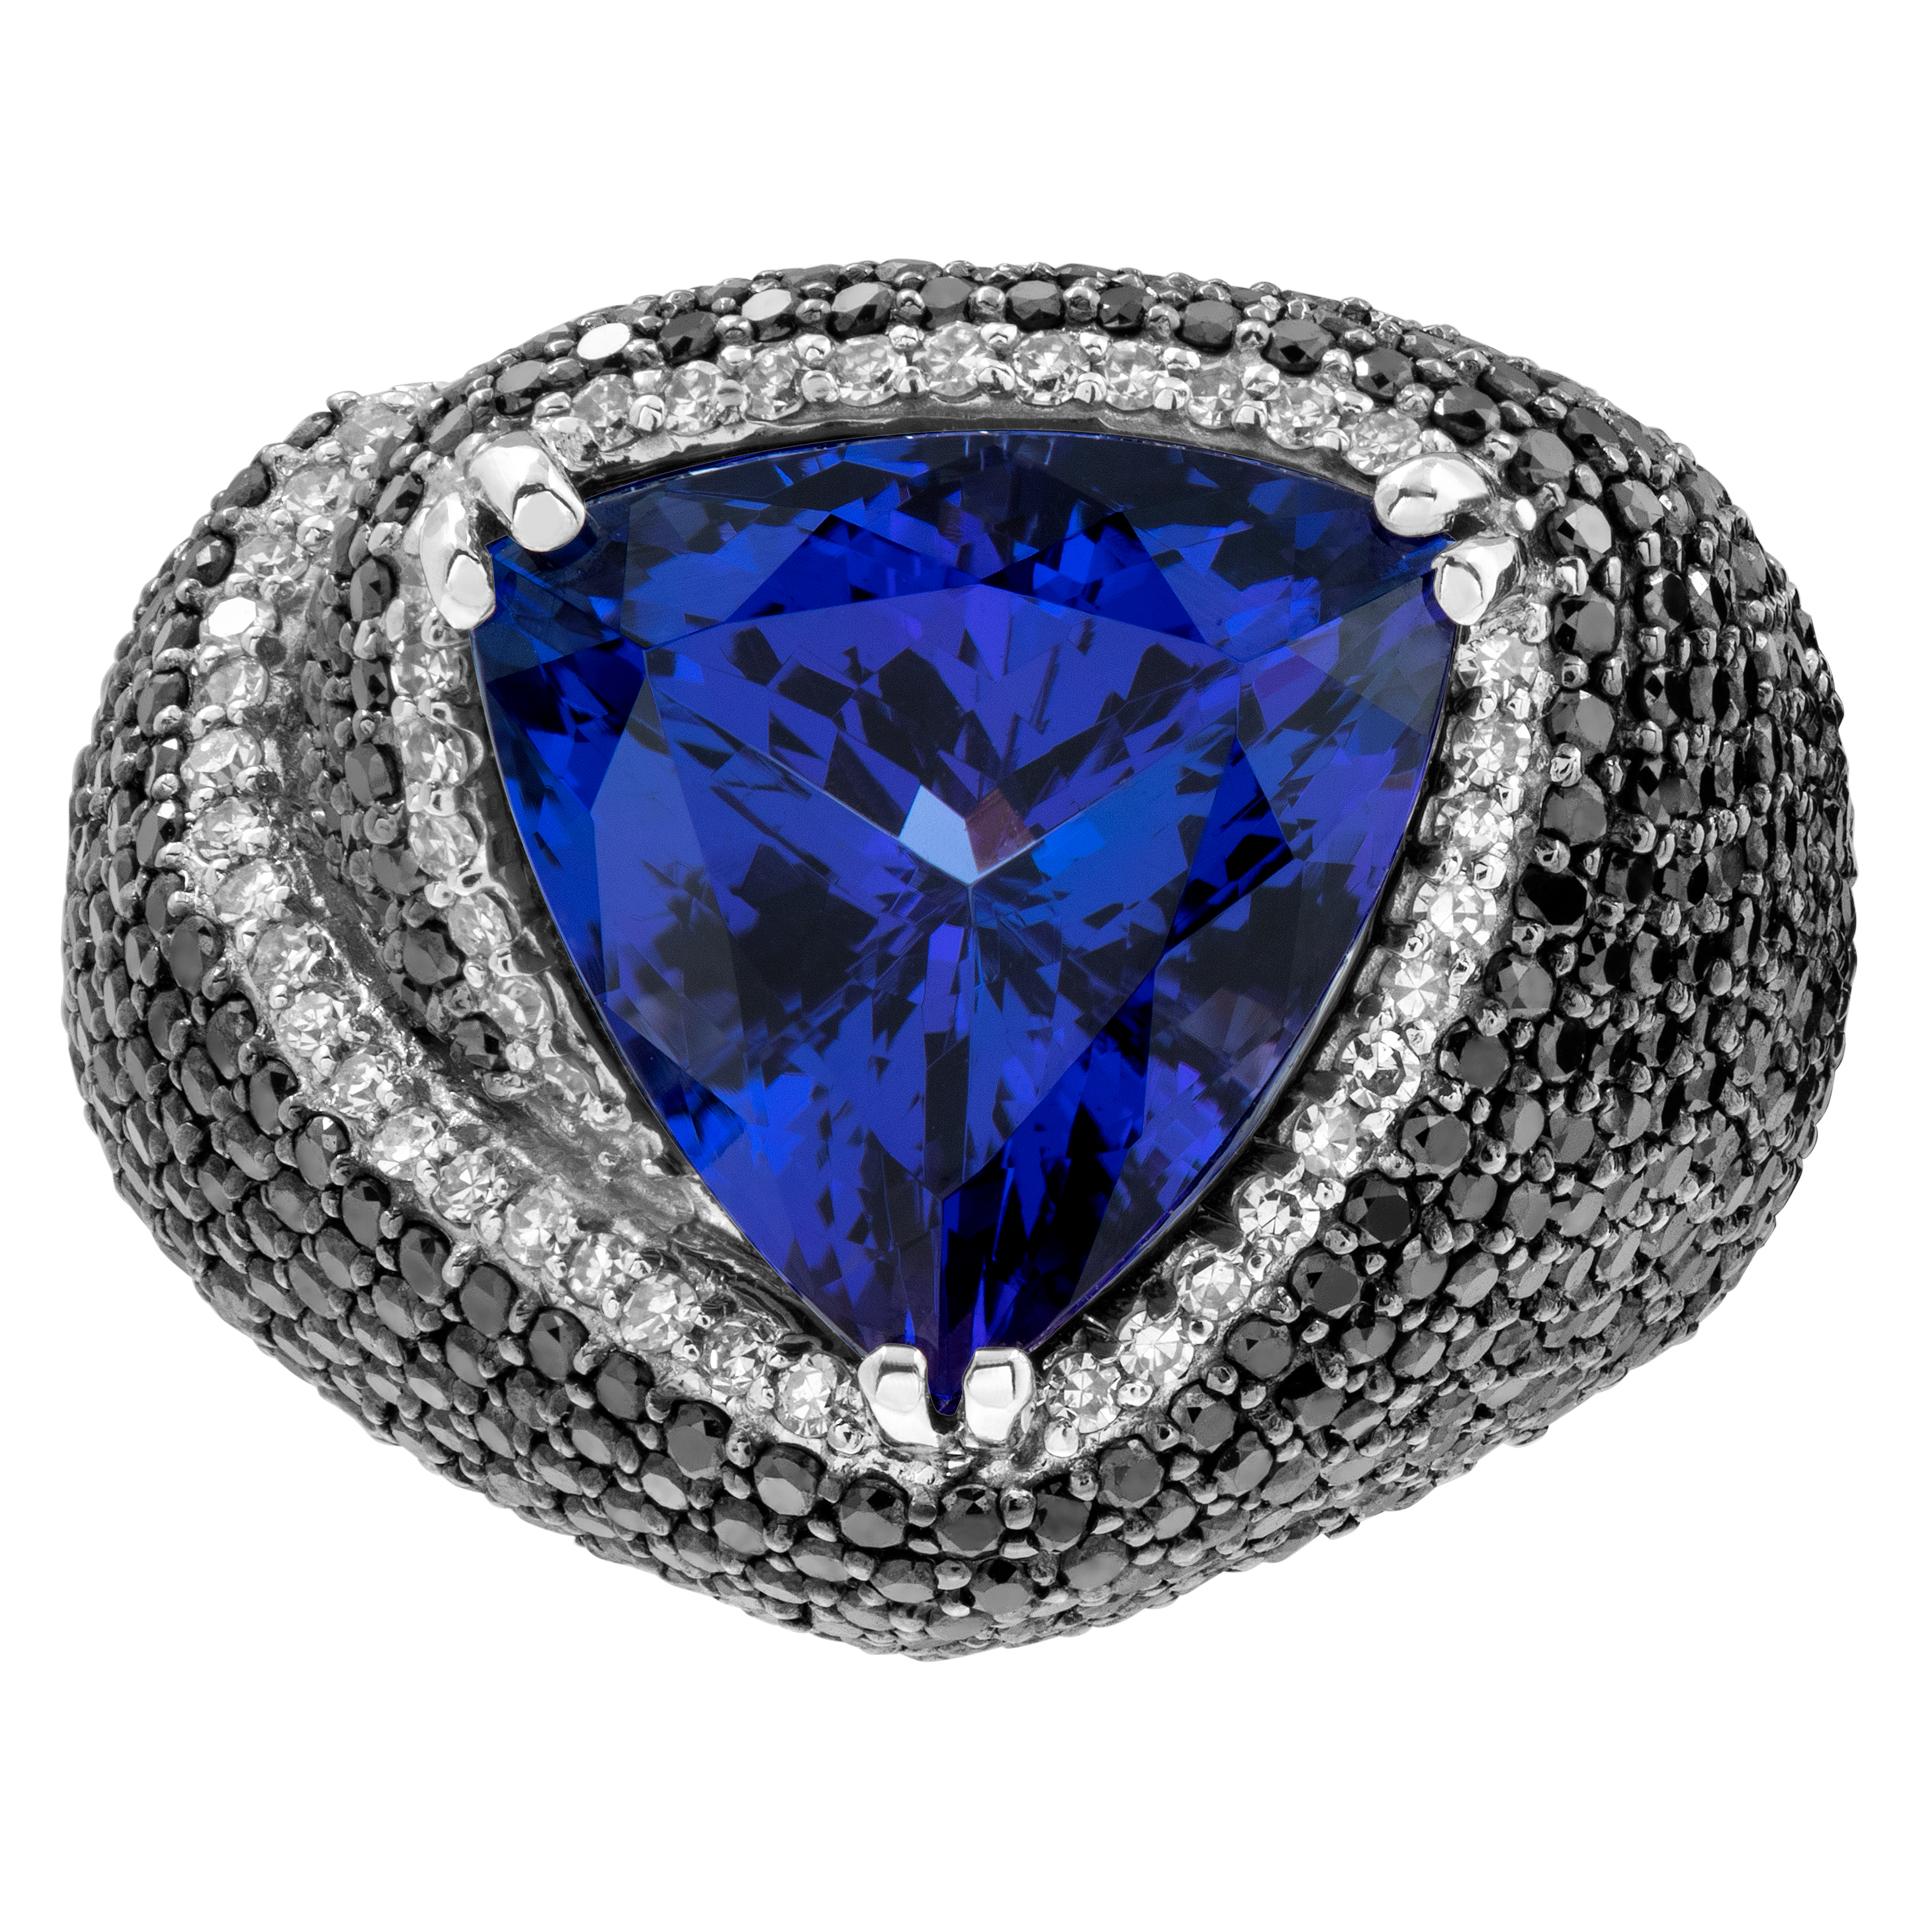 Effy Trillion cut 7.73 ct tanzanite ring in 14k white gold with 2.3 cts in pave black & white diamonds. Ring size 7. Comes with Effy box.This tanzanite/diamond ring is currently size 7 and some items can be sized up or down, please ask! It weighs